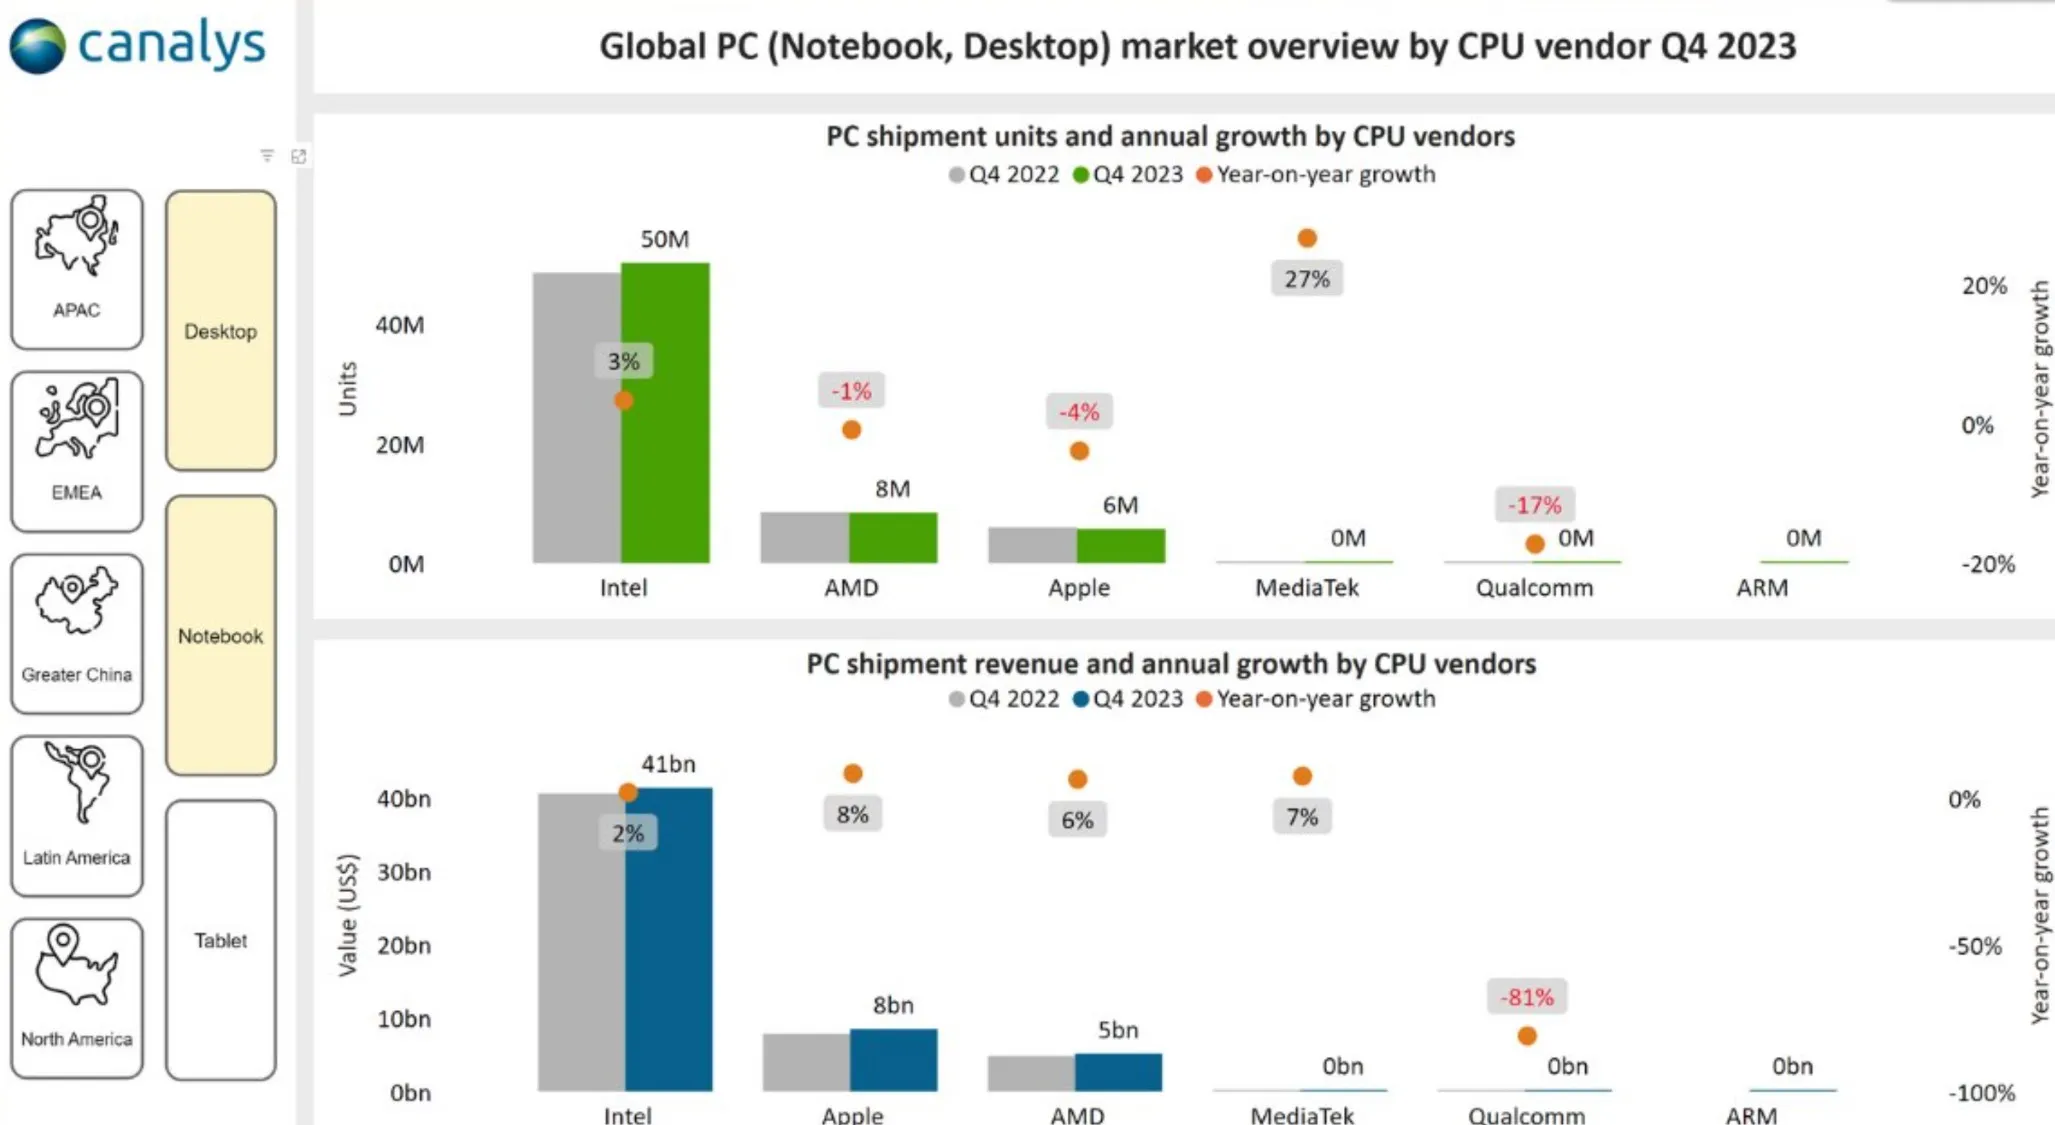 The market share between Intel, AMD, and Apple